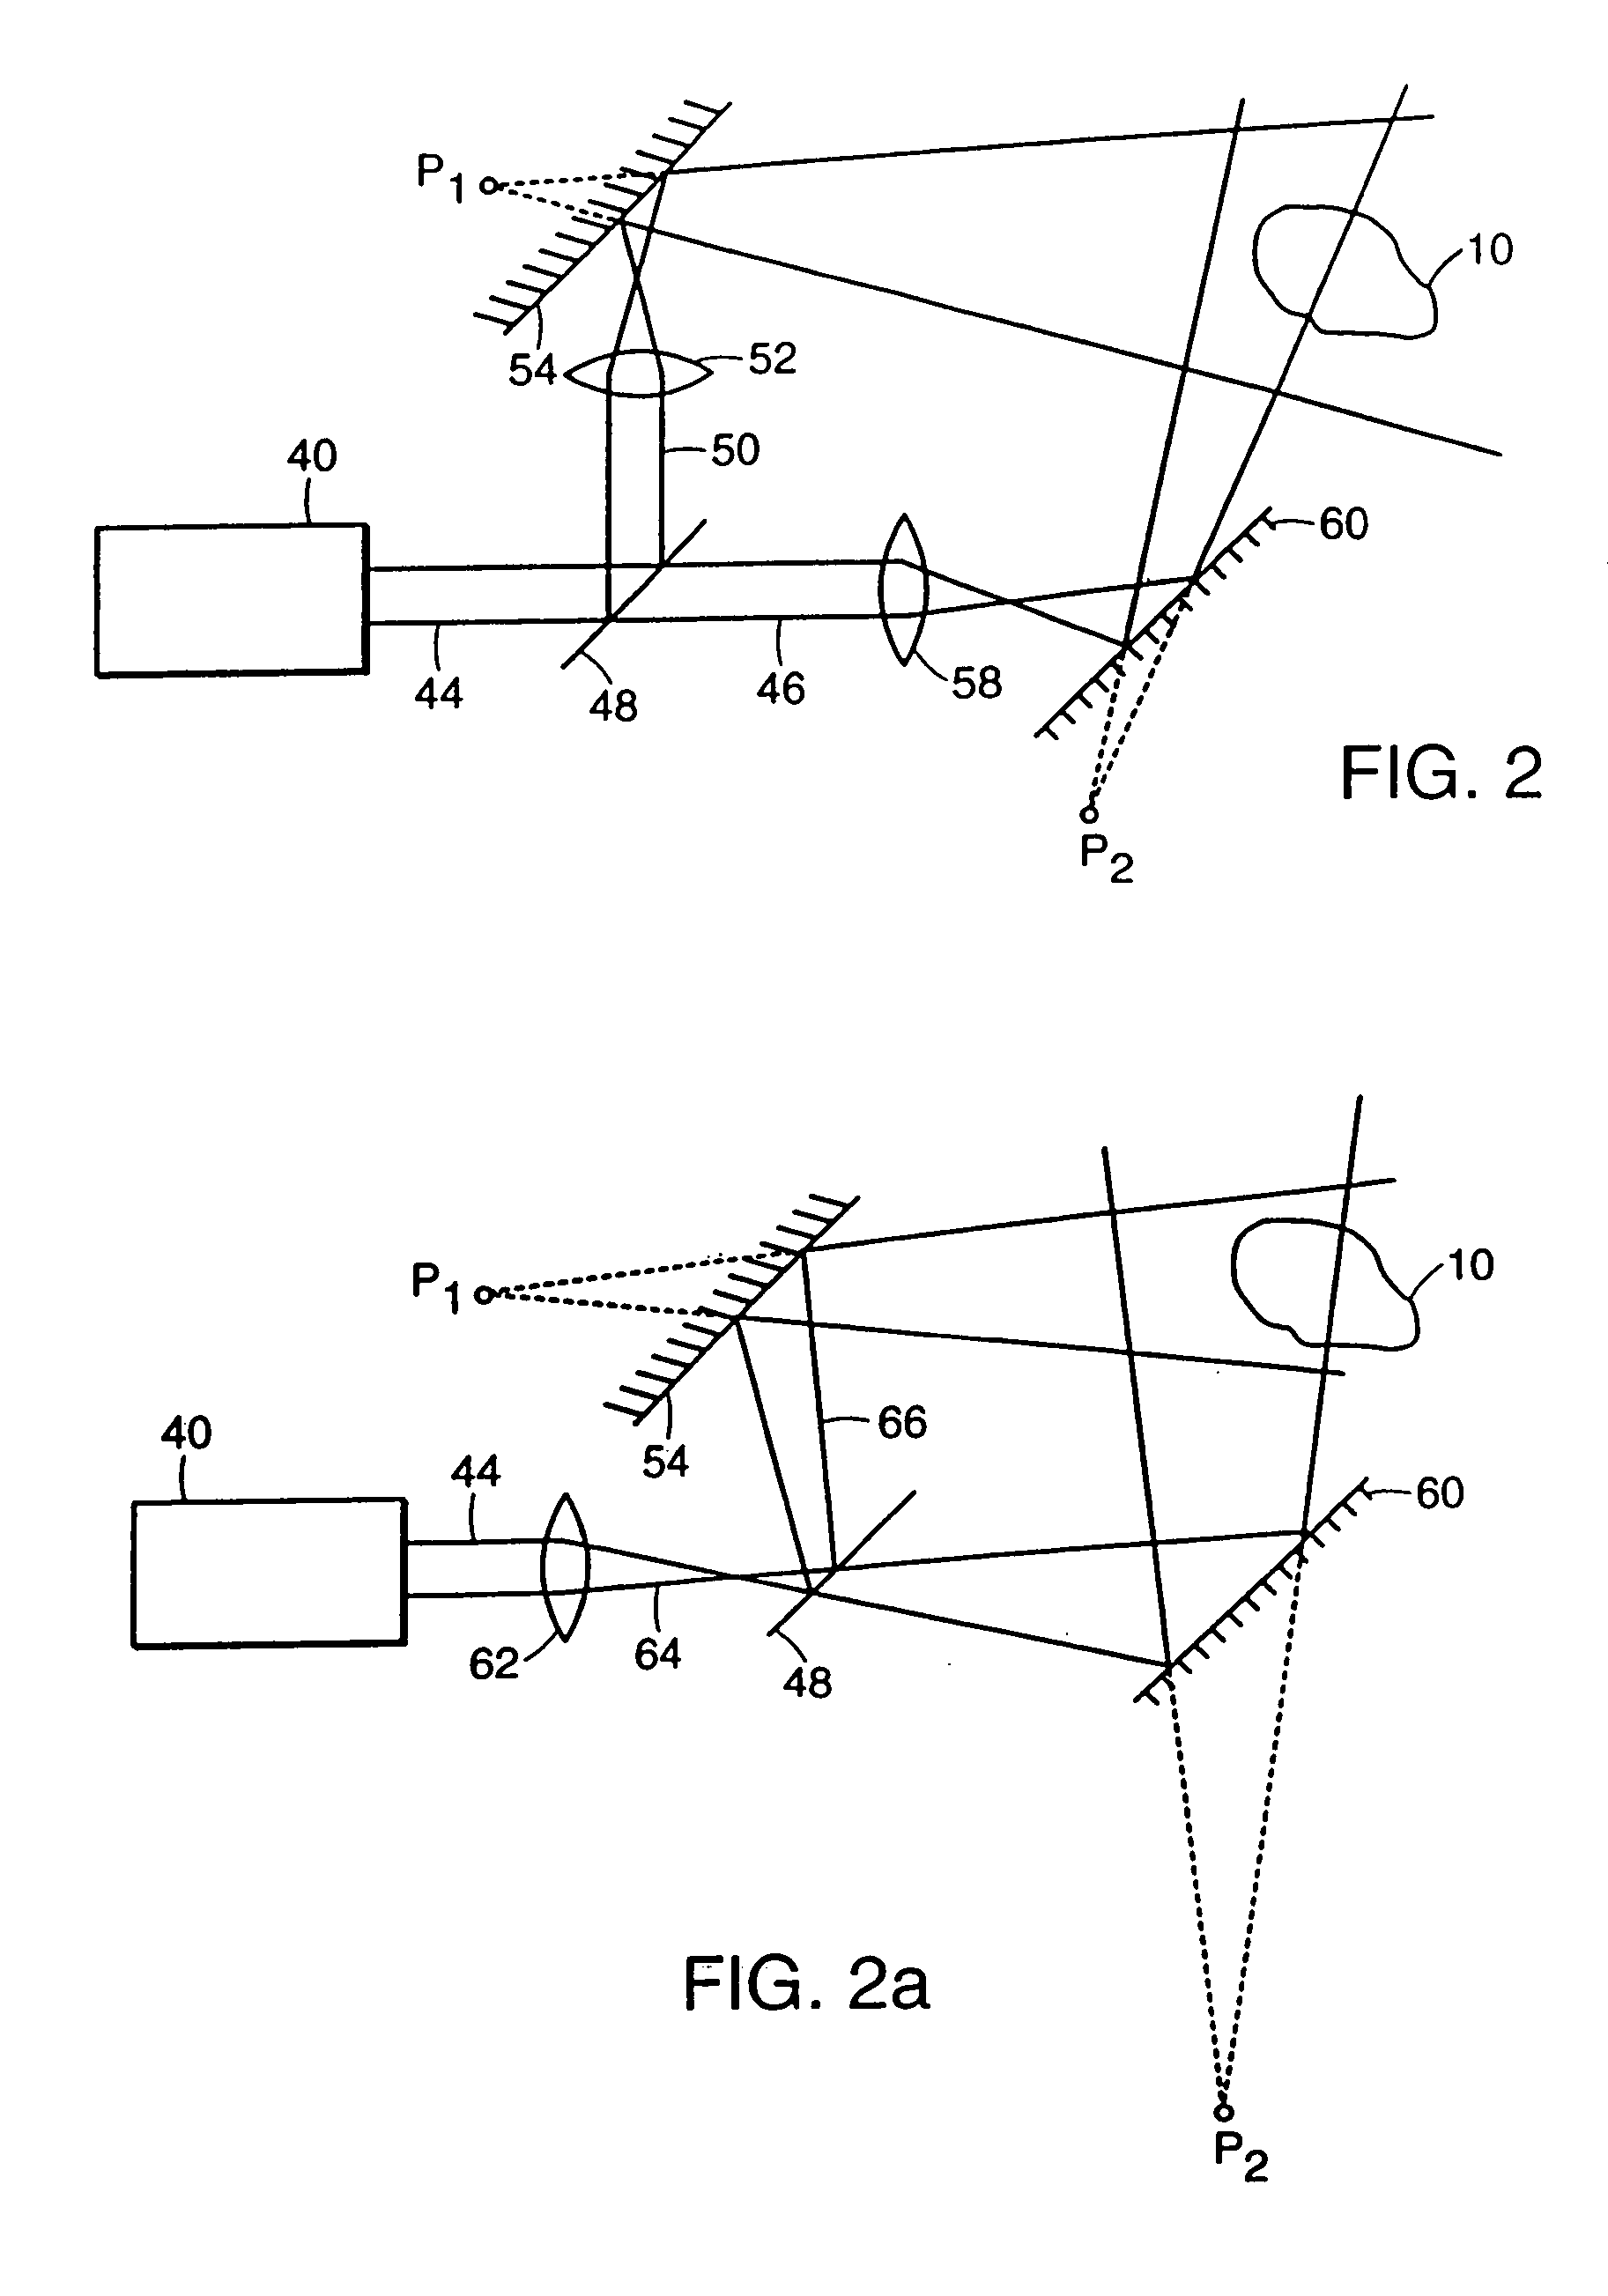 Apparatus and methods for surface contour measurement